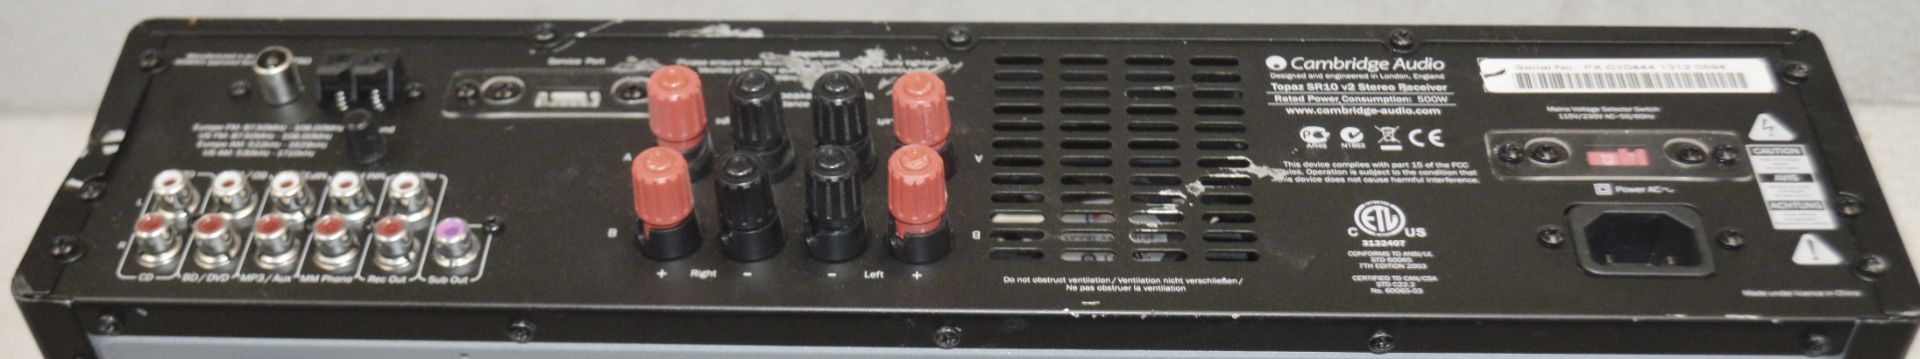 1 x Cambridge Audio Topaz SR10 V2 Integrated Amp/Receiver - RRP £1,300 - Recently Removed From A - Image 3 of 5